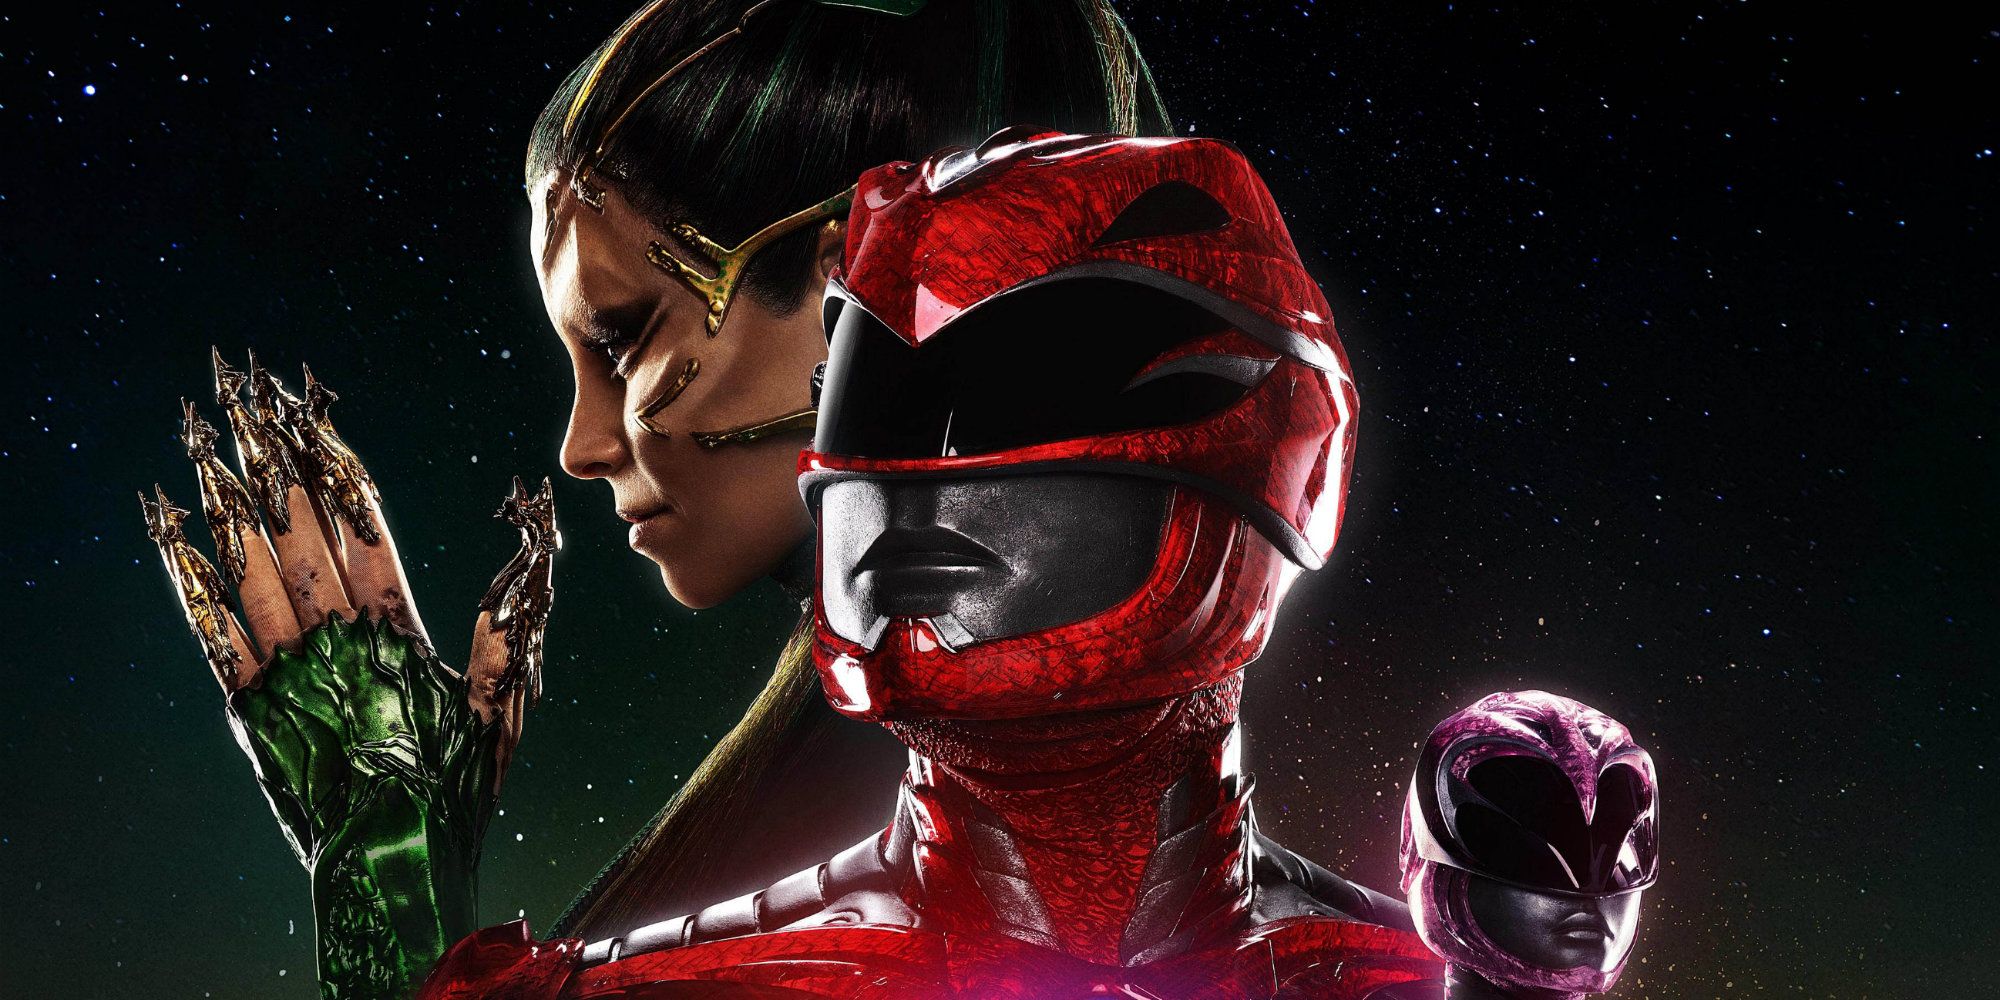 Power Rangers poster with Rita Repulsa (cropped)